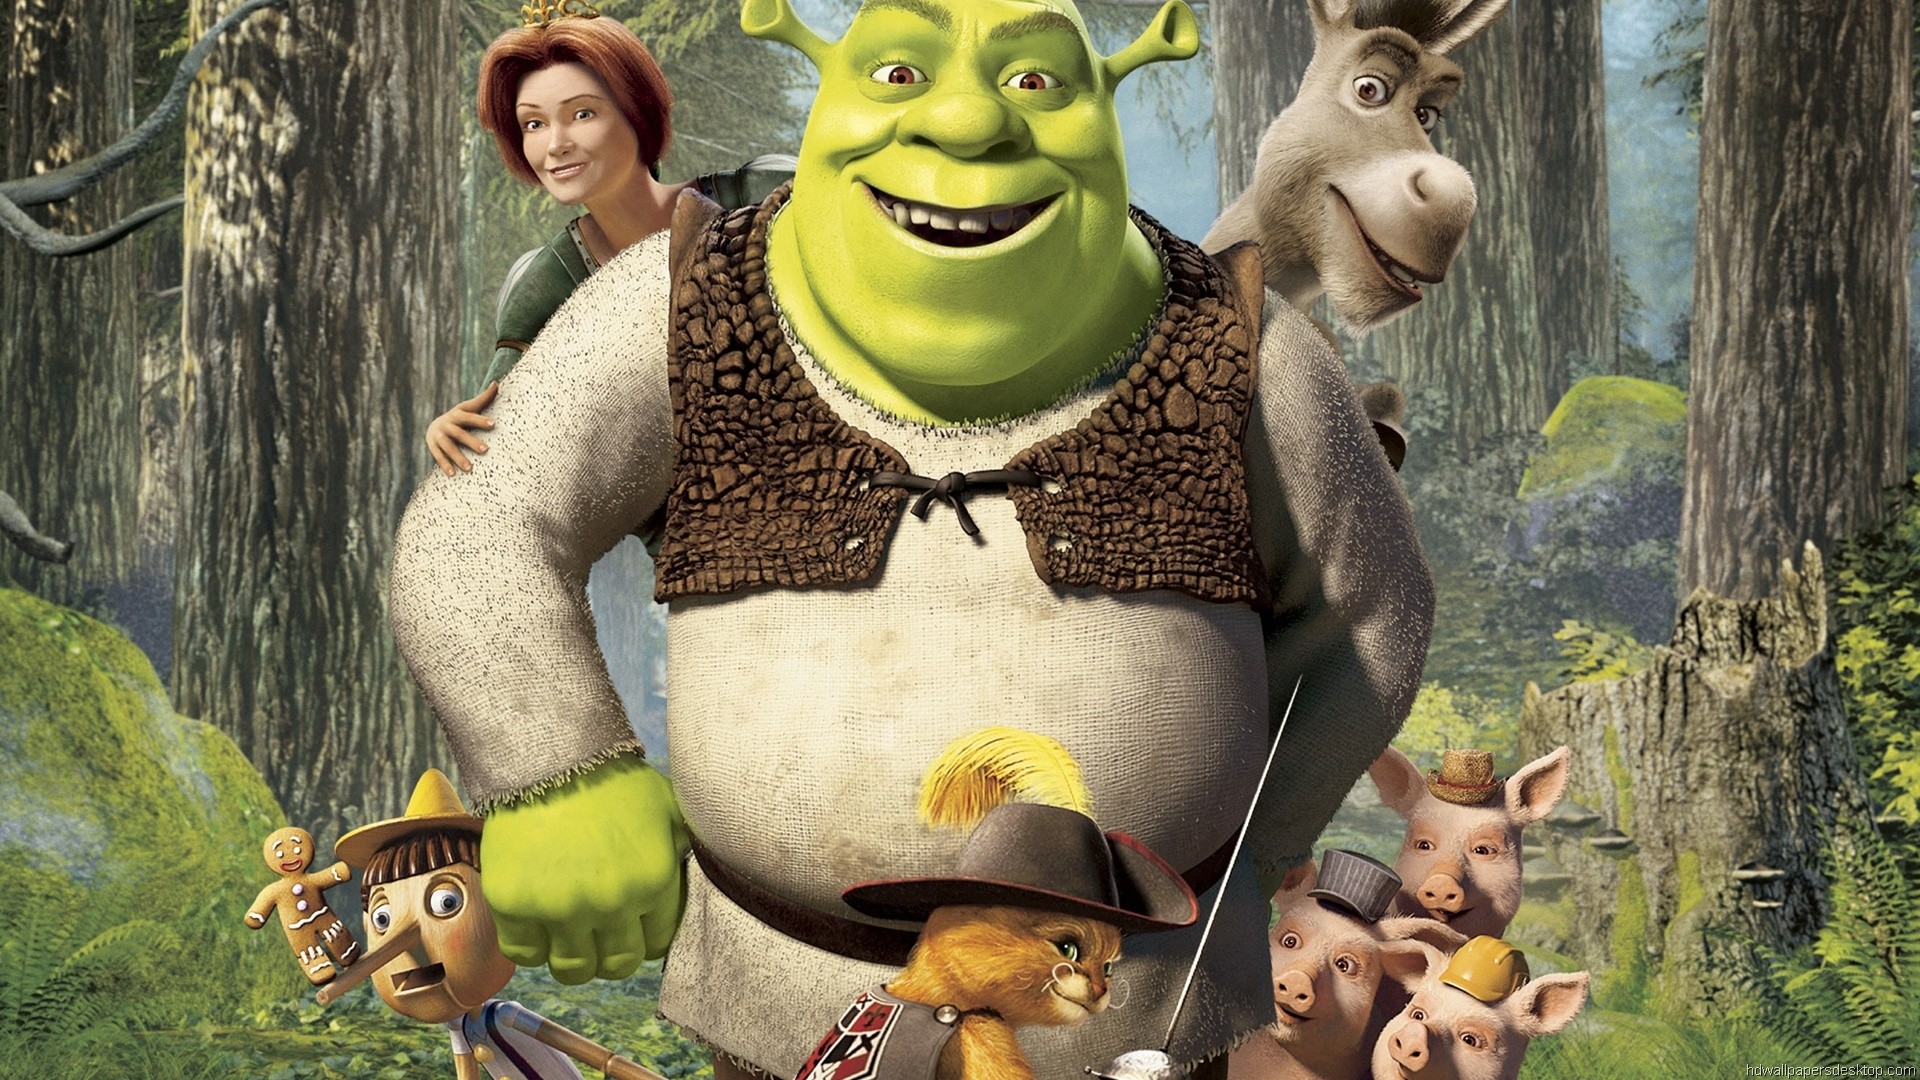 Shrek 5 Confirmation and Cancellation Reports